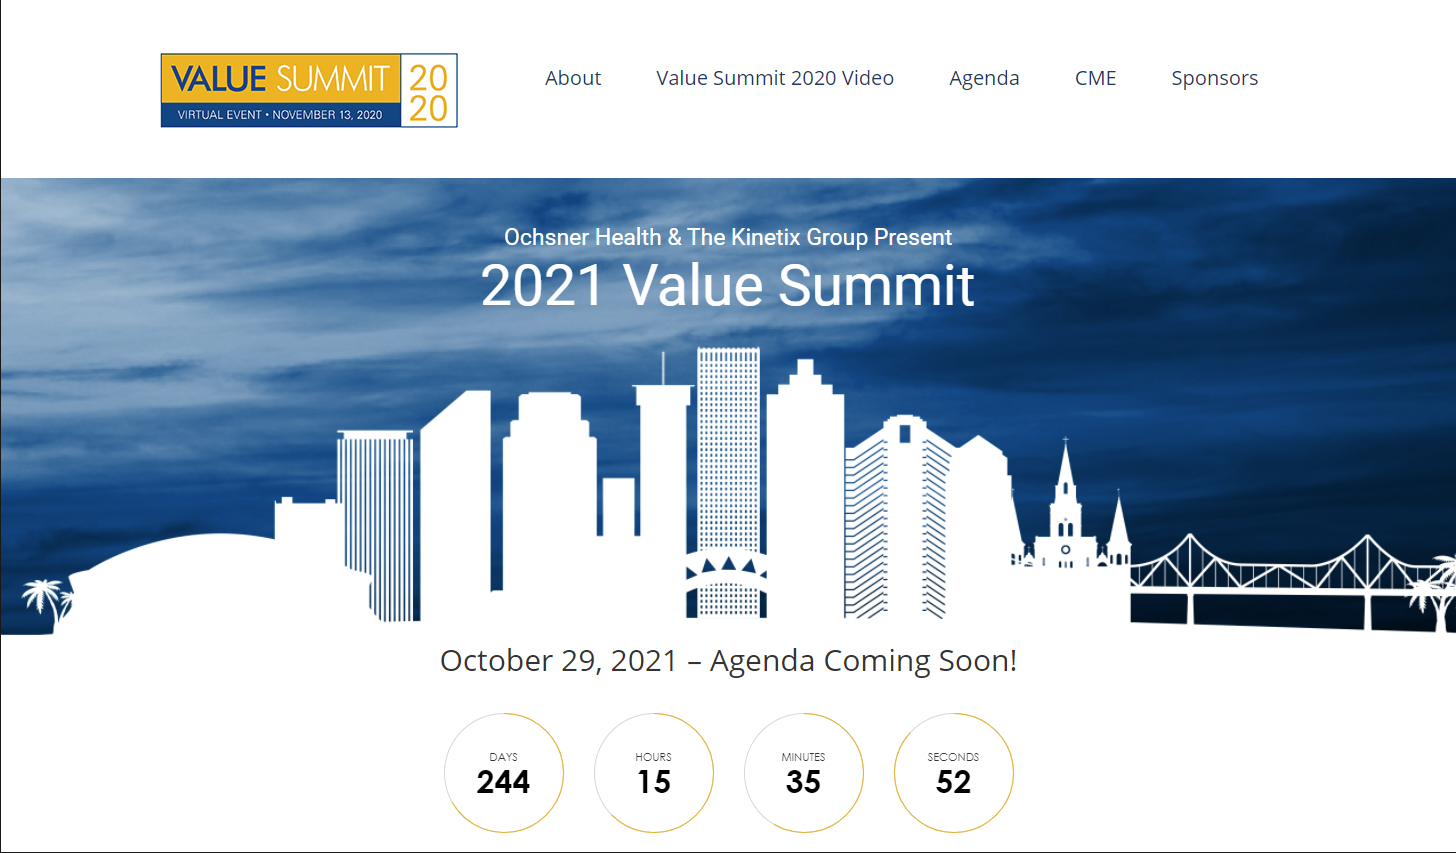 The Annual Value Summit